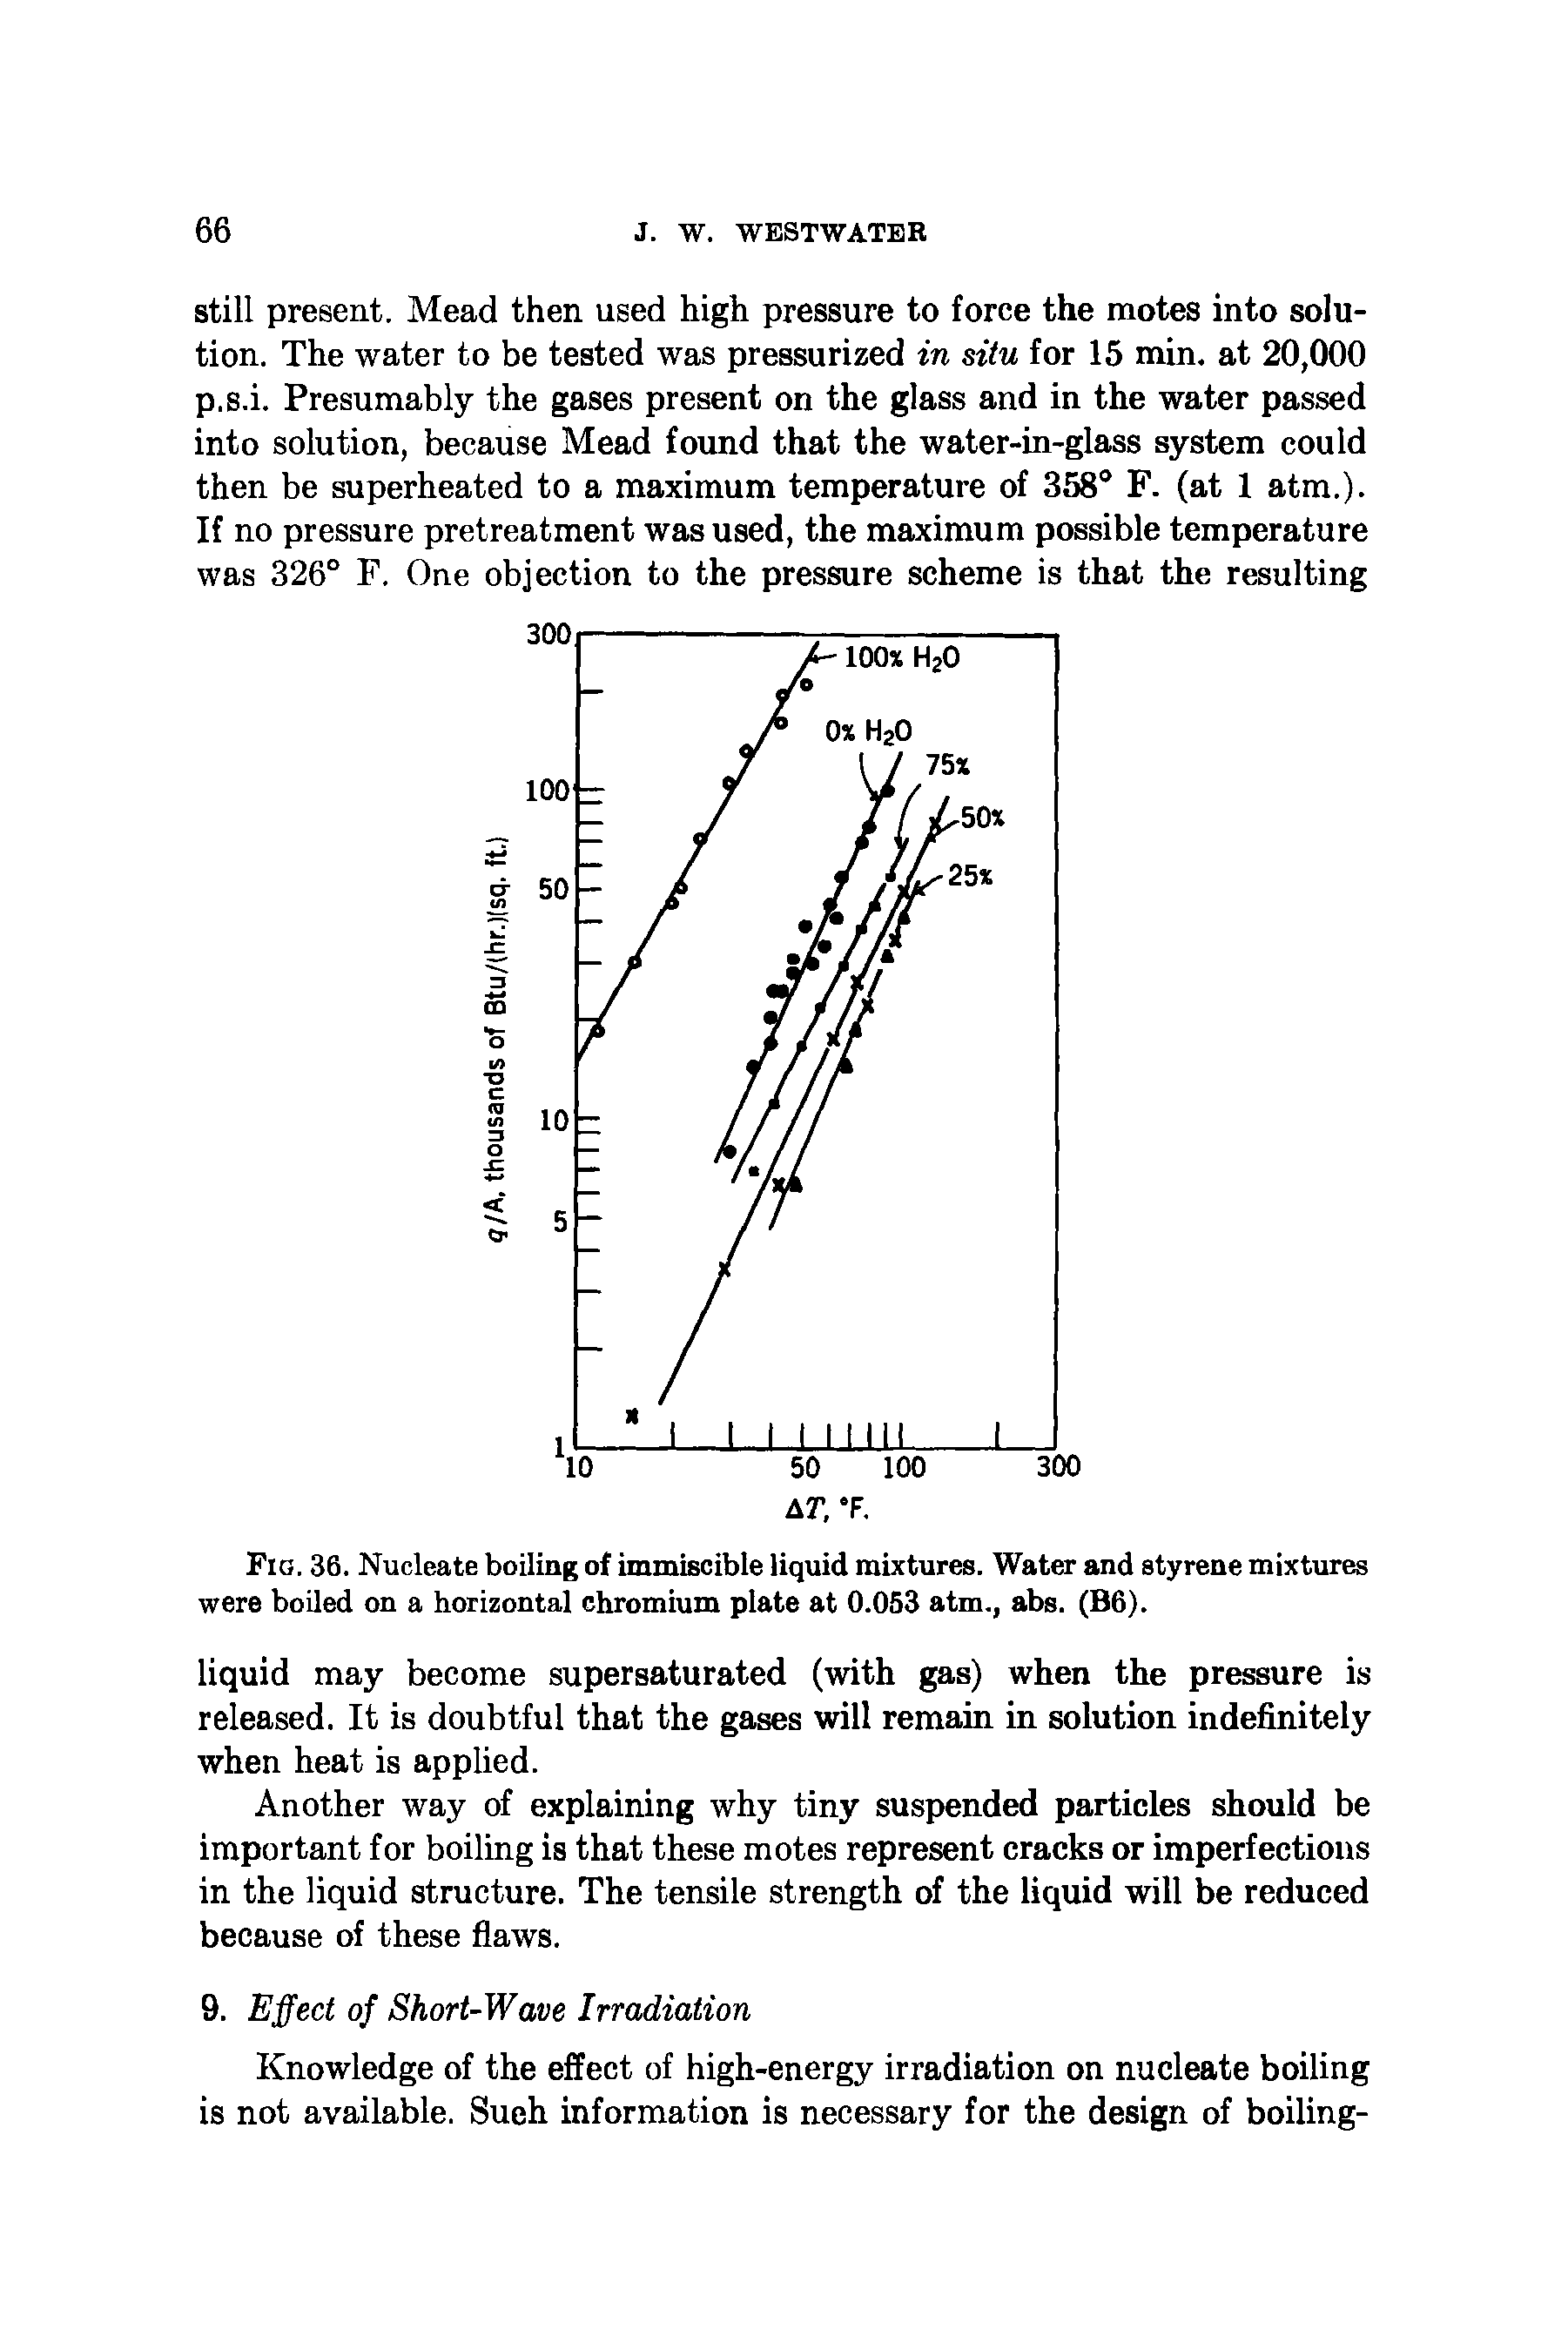 Fig. 36. Nucleate boiling of immiscible liquid mixtures. Water and styrene mixtures were boiled on a horizontal chromium plate at 0.053 atm., abs. (B6).